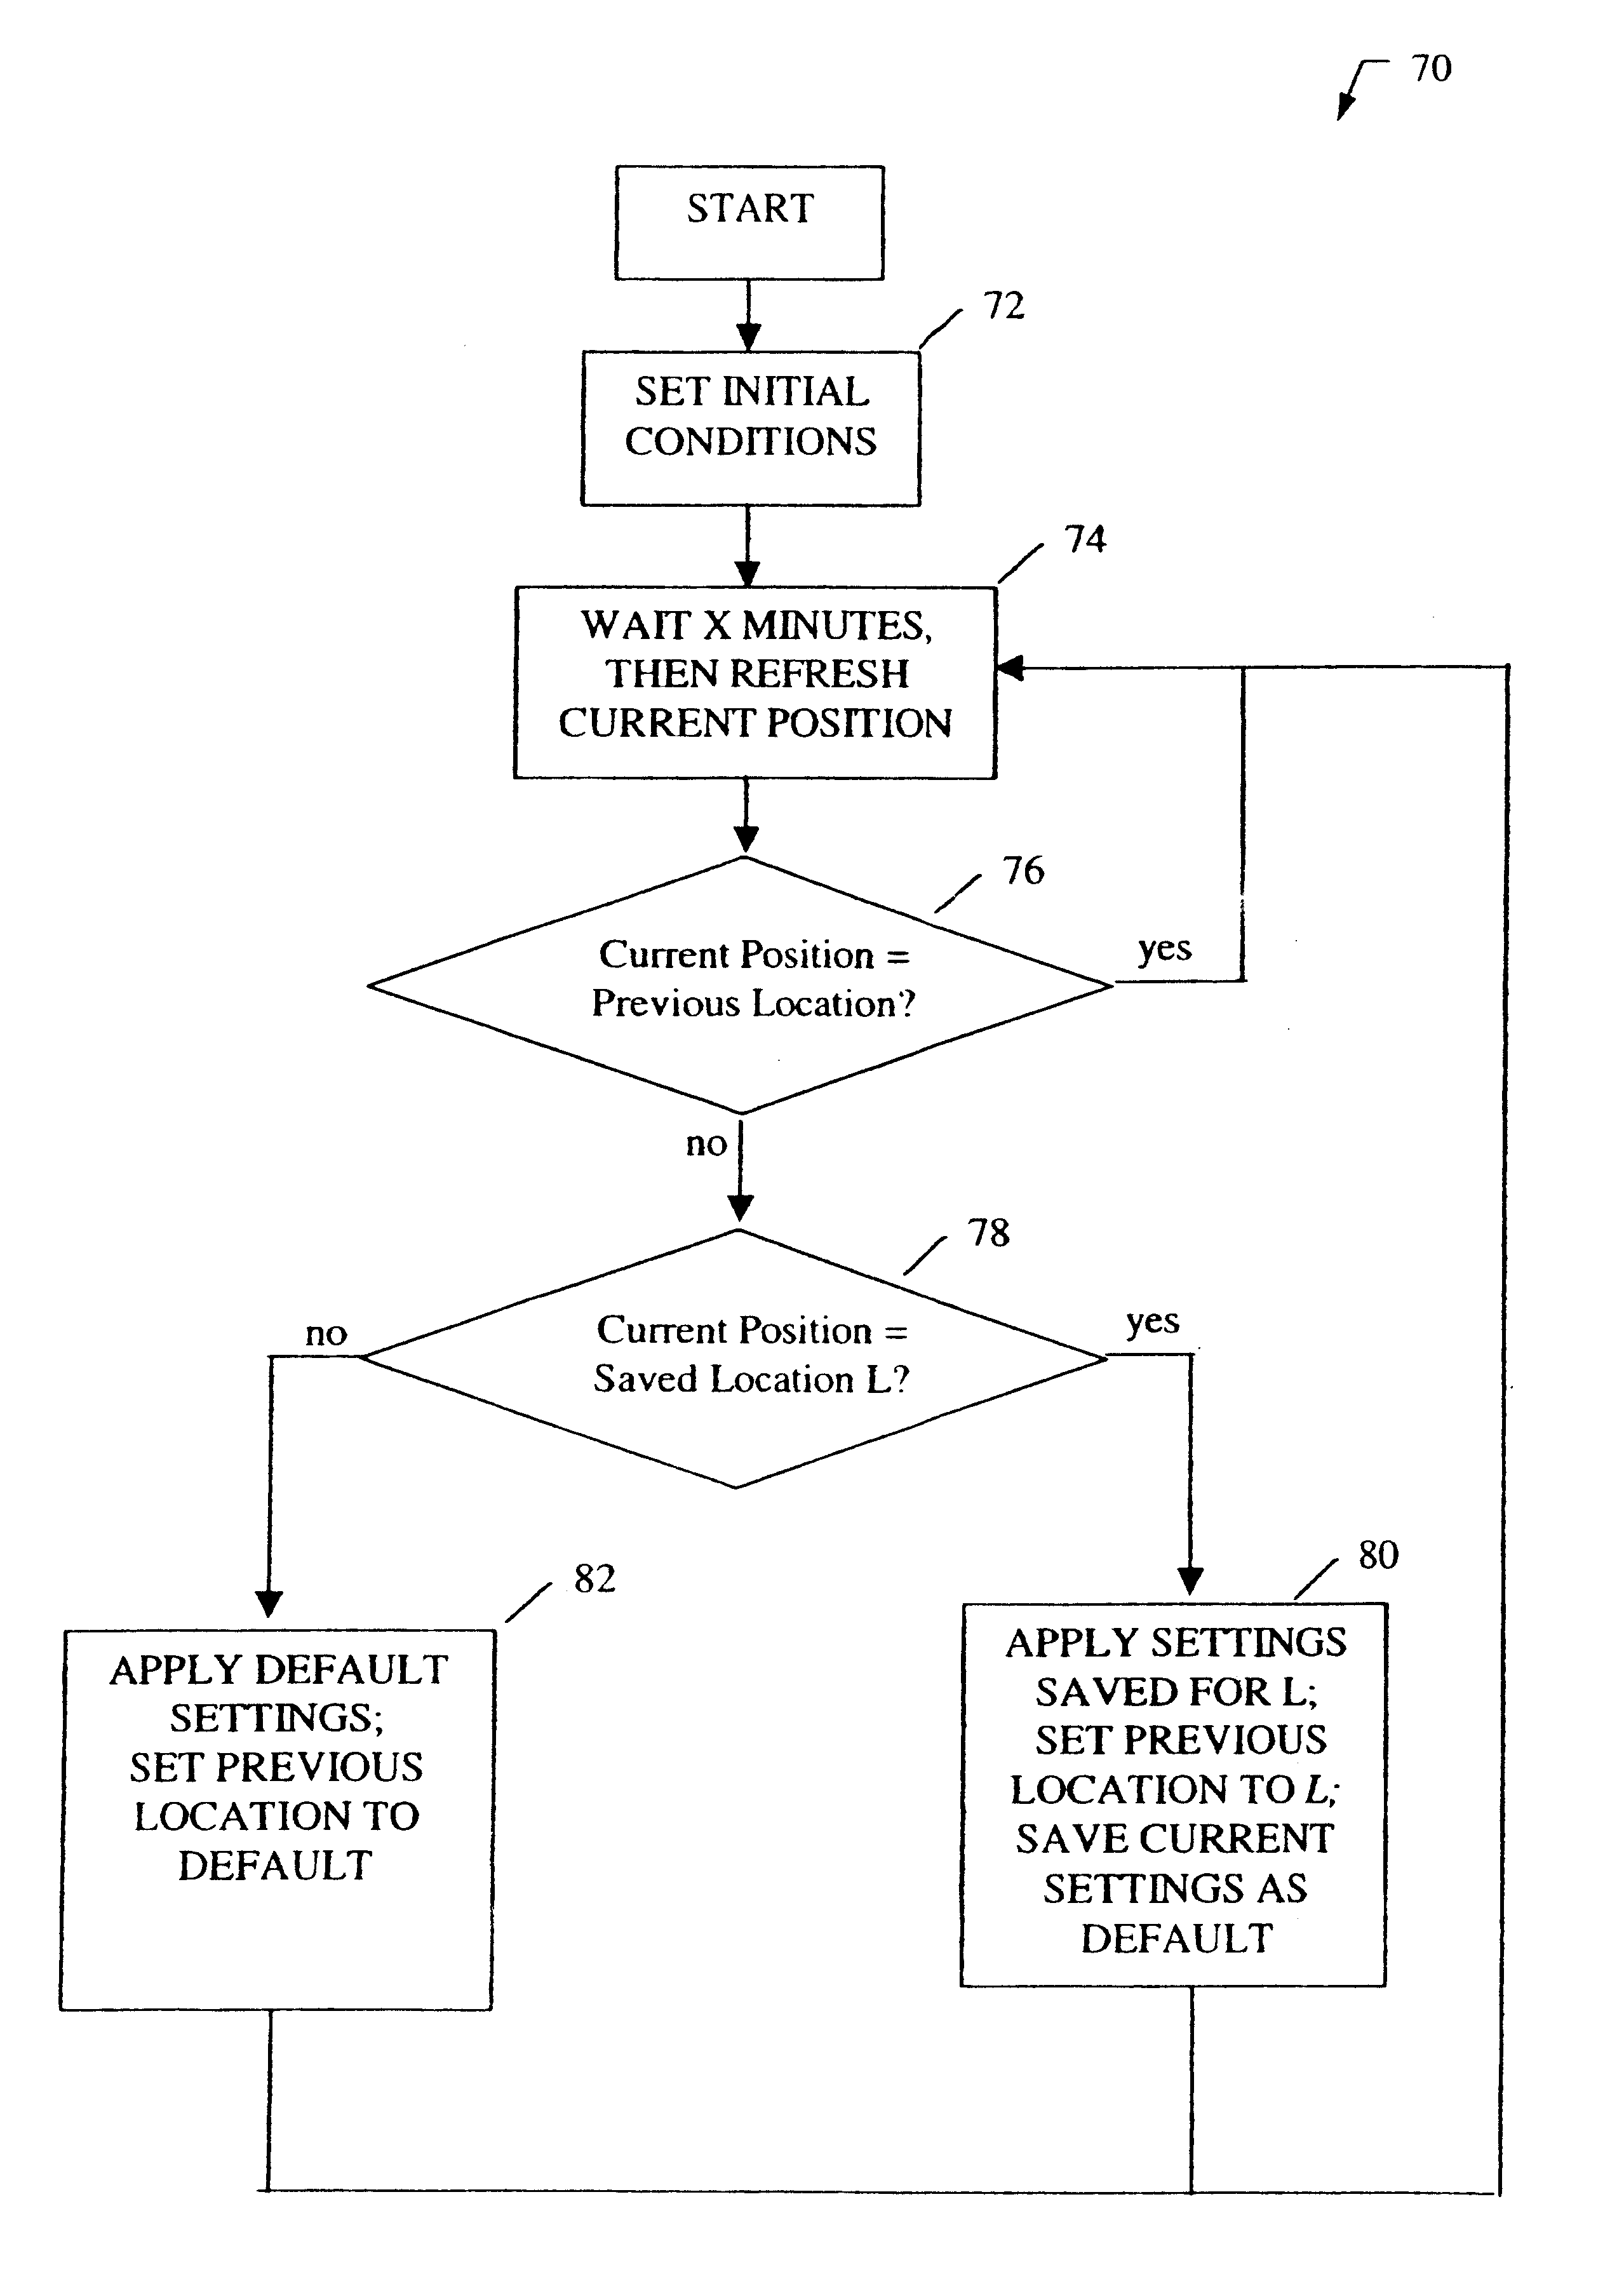 System for automatically configuring features on a mobile telephone based on geographic location